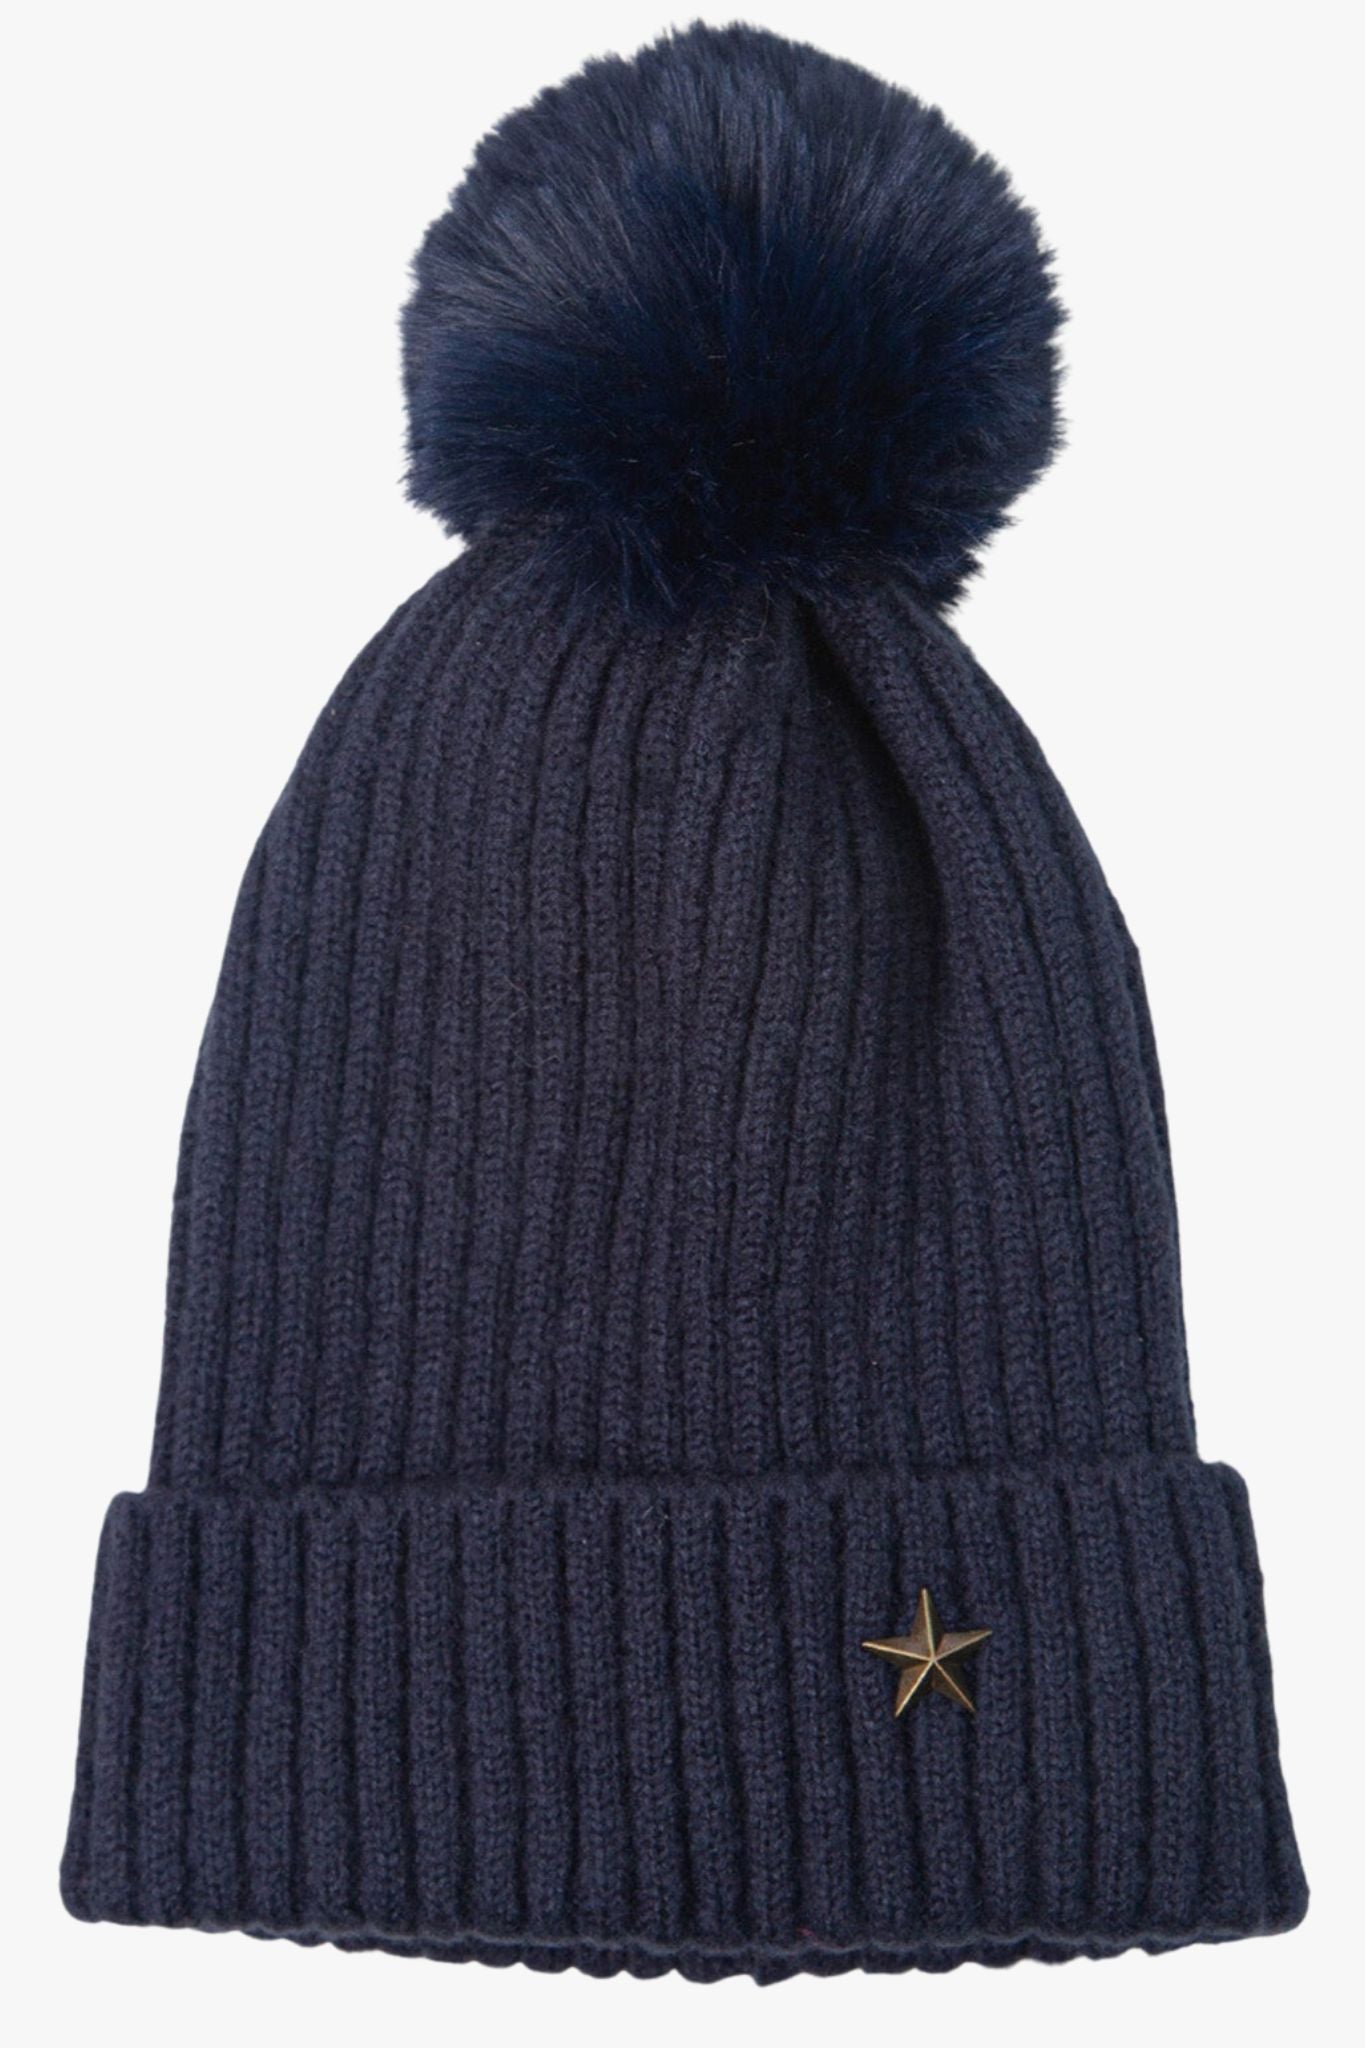 navy blue winter bobble hat with a metal gold star motif on the rim